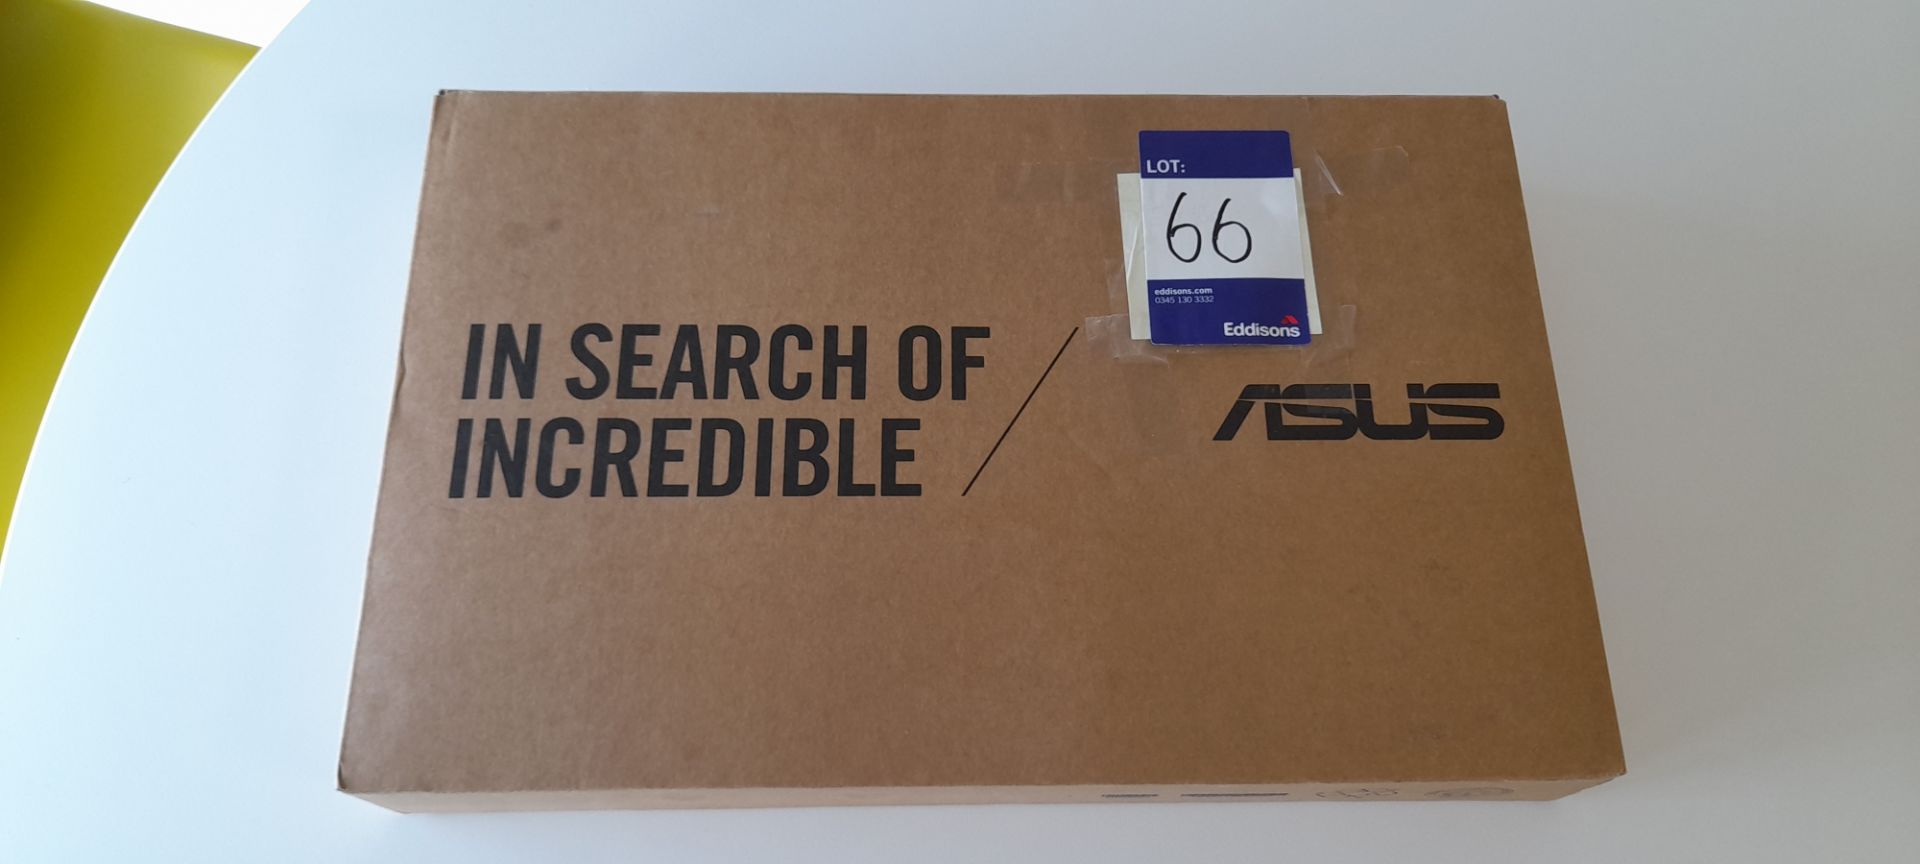 ASUS E510M Notebook PC, intel Celeron inside with charger. Collection from Canary Wharf, London,